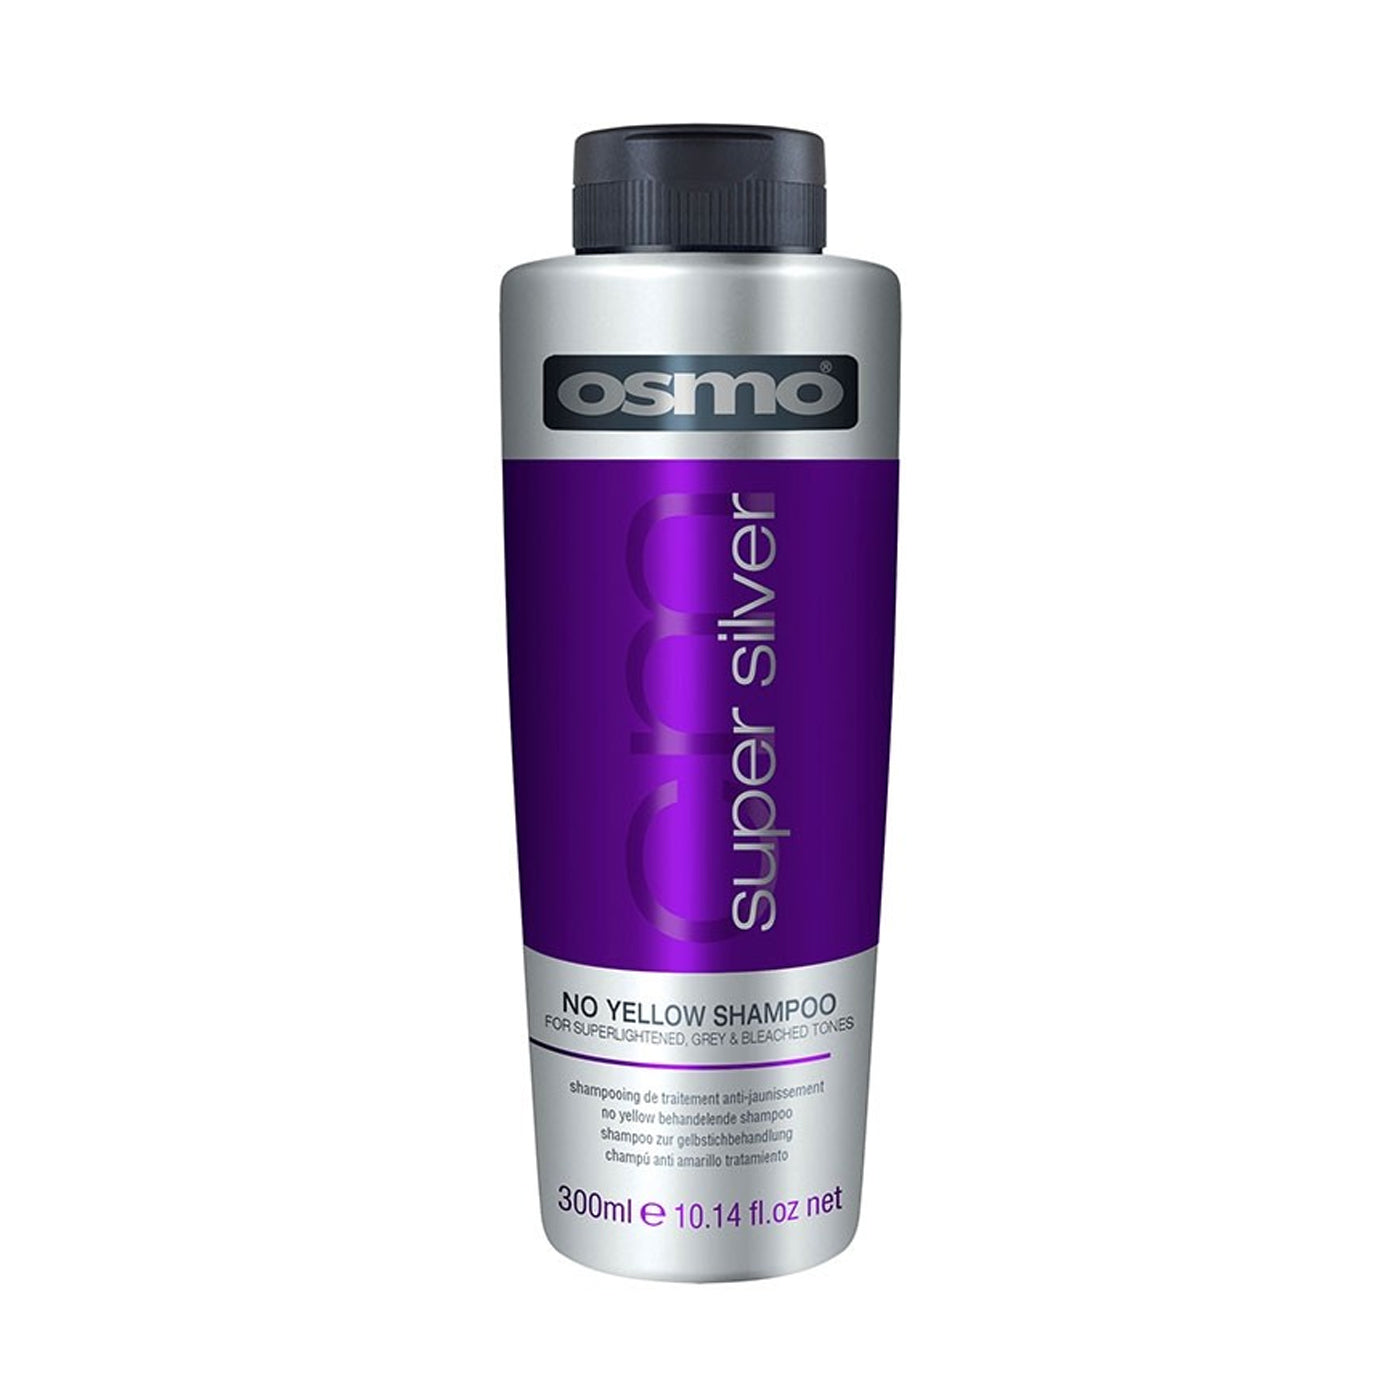 Osmo Super Silver No Yellow Shampoo (300ml) - Ultimate Hair and Beauty